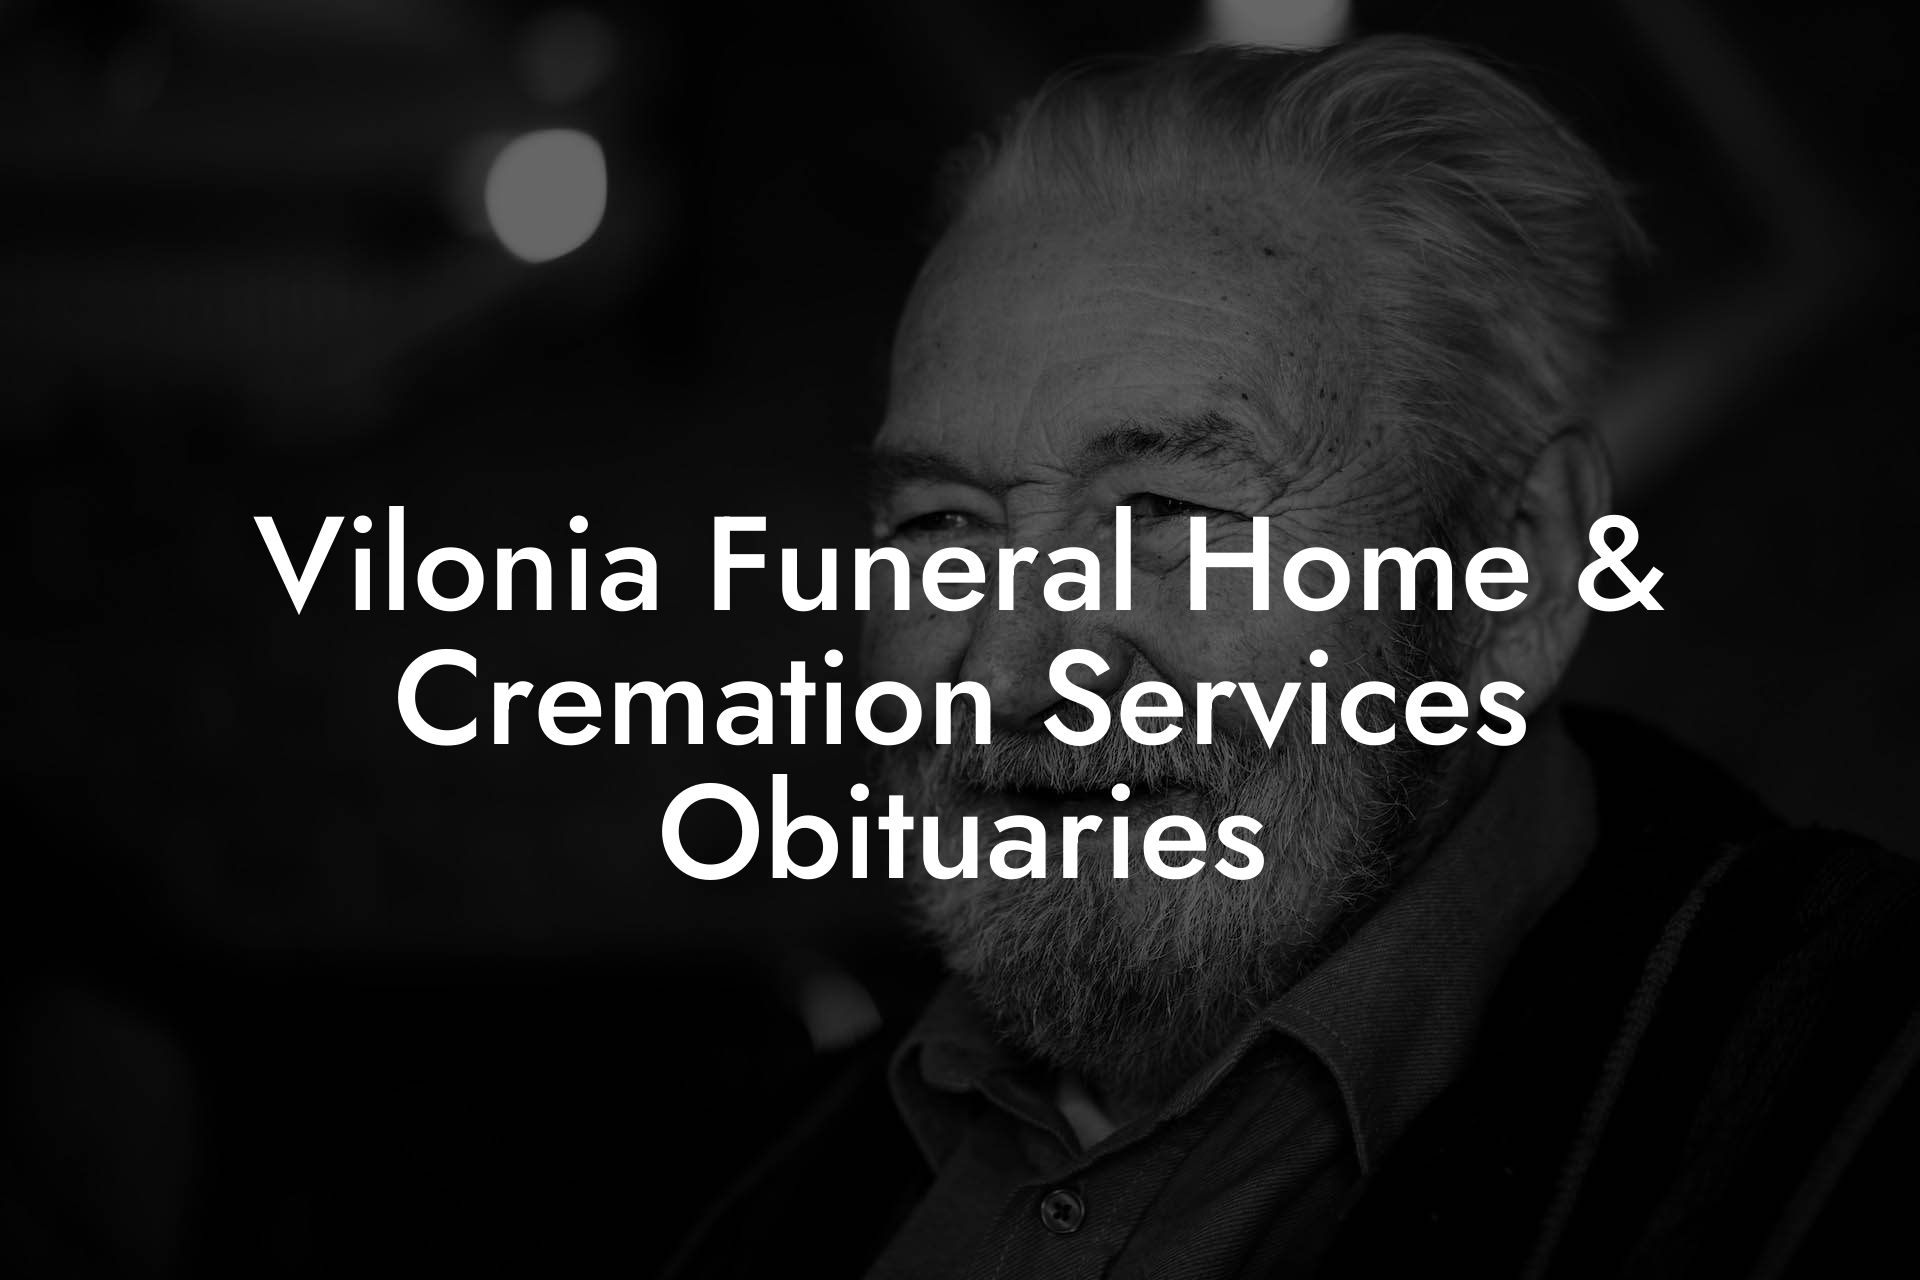 Vilonia Funeral Home & Cremation Services Obituaries